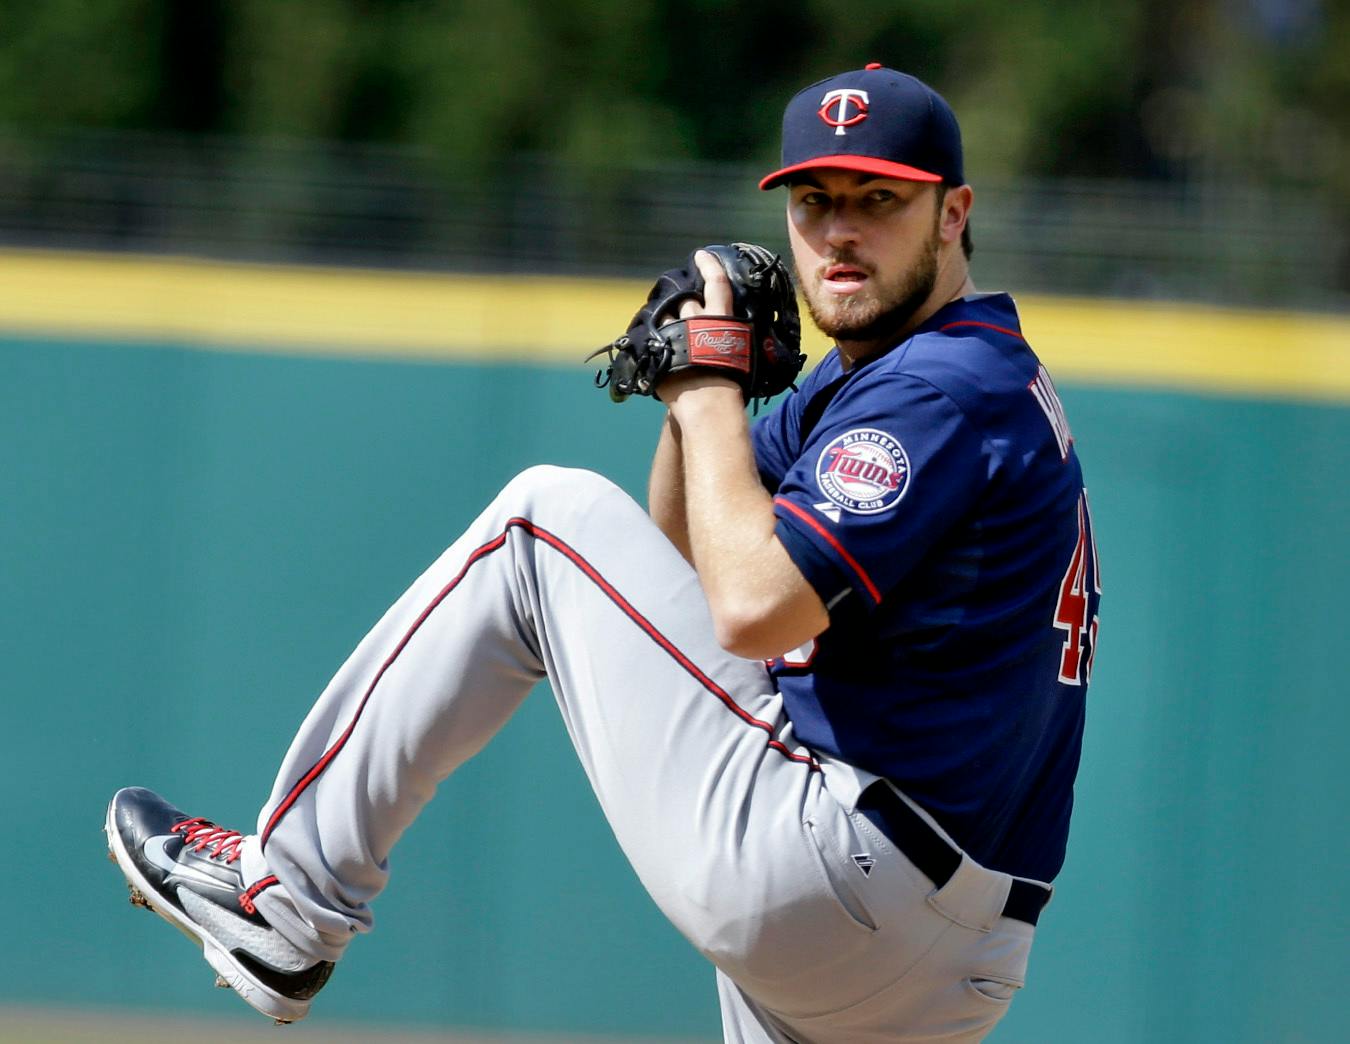 Twins righthander Phil Hughes says it's fun when team scores a lot, but he needs to pitch better than he did Saturday.